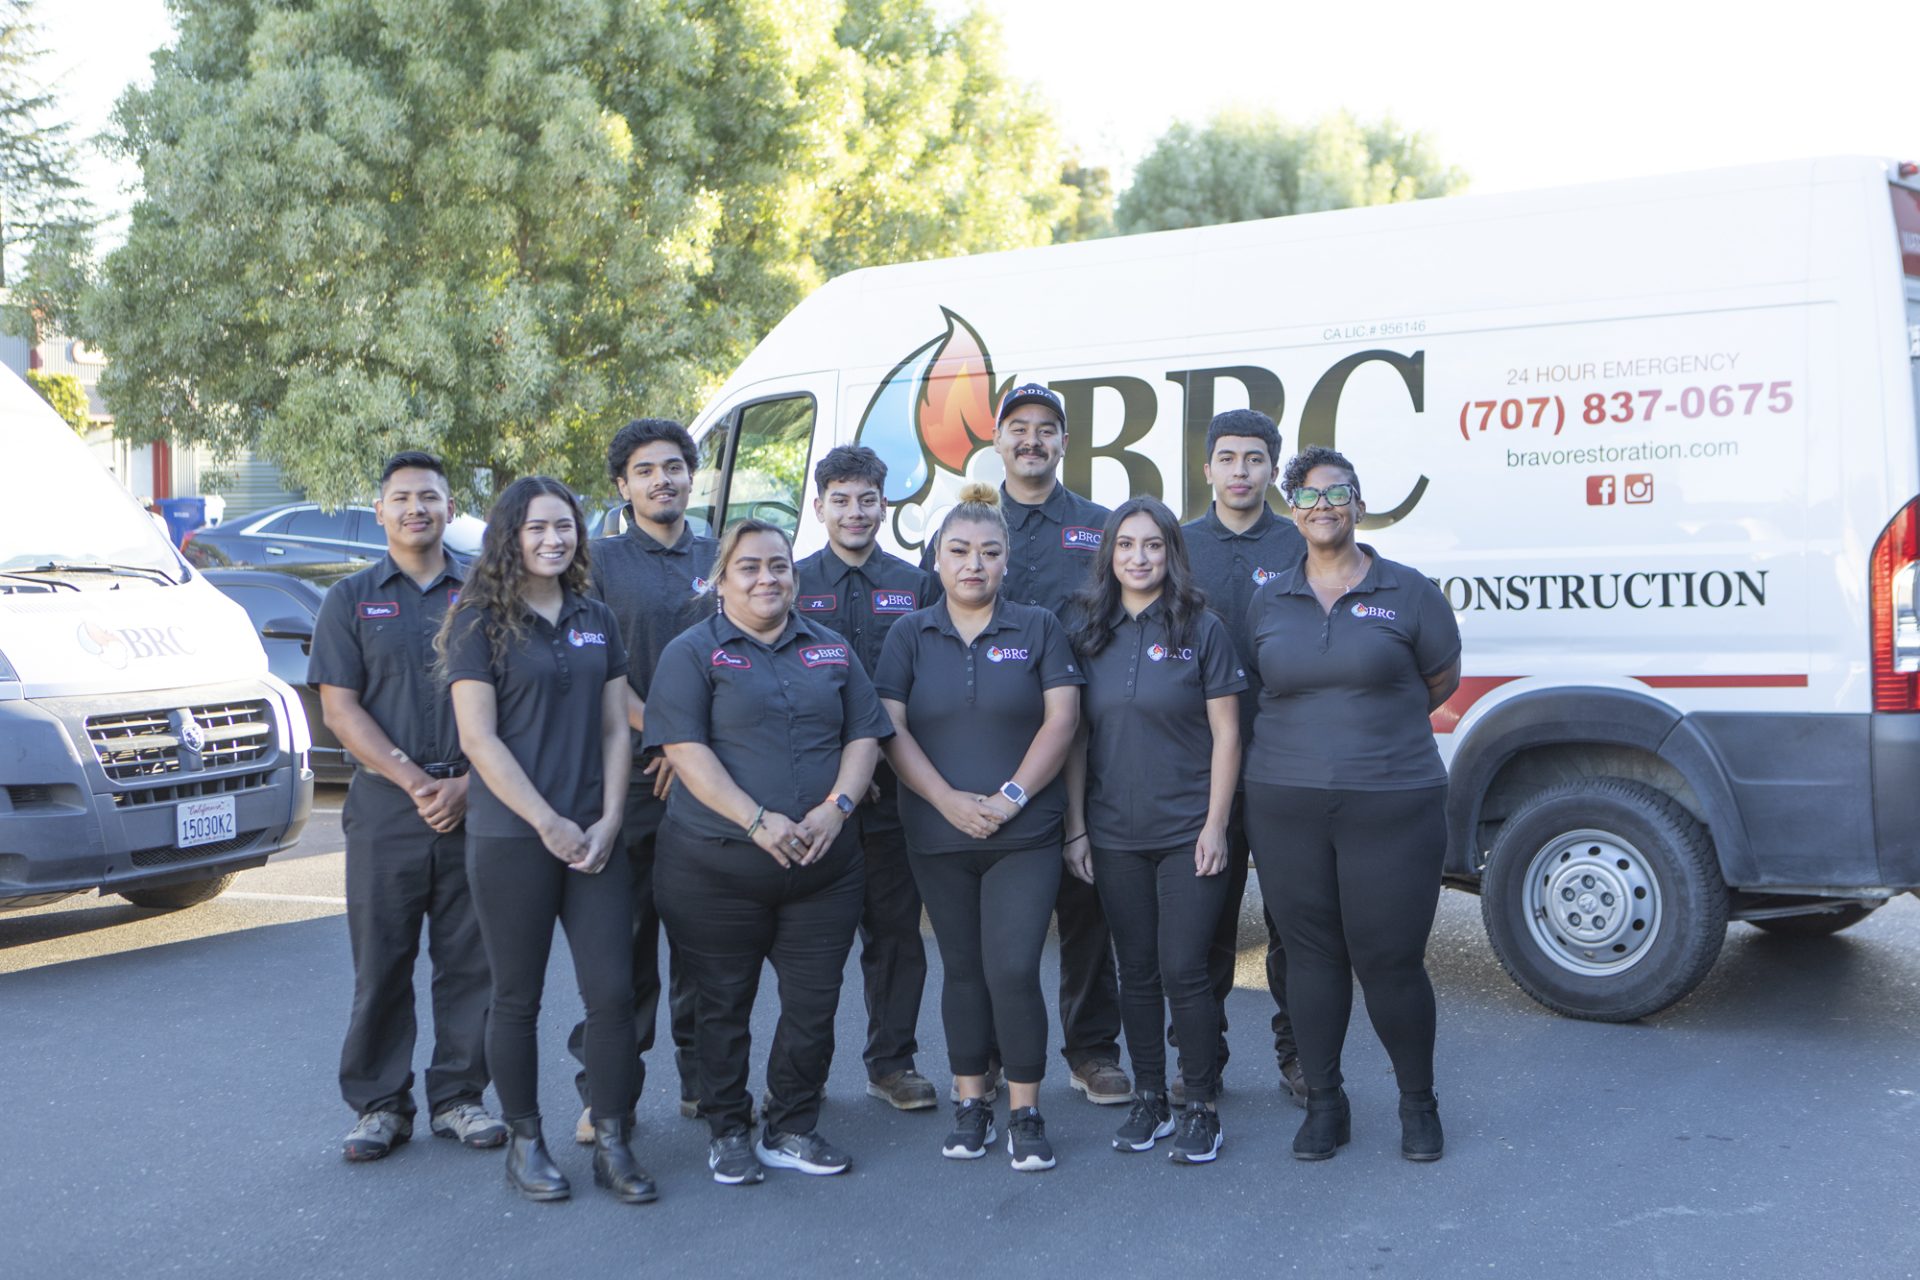 A group of people posing in front of a van equipped with fire damage remediation expertise.